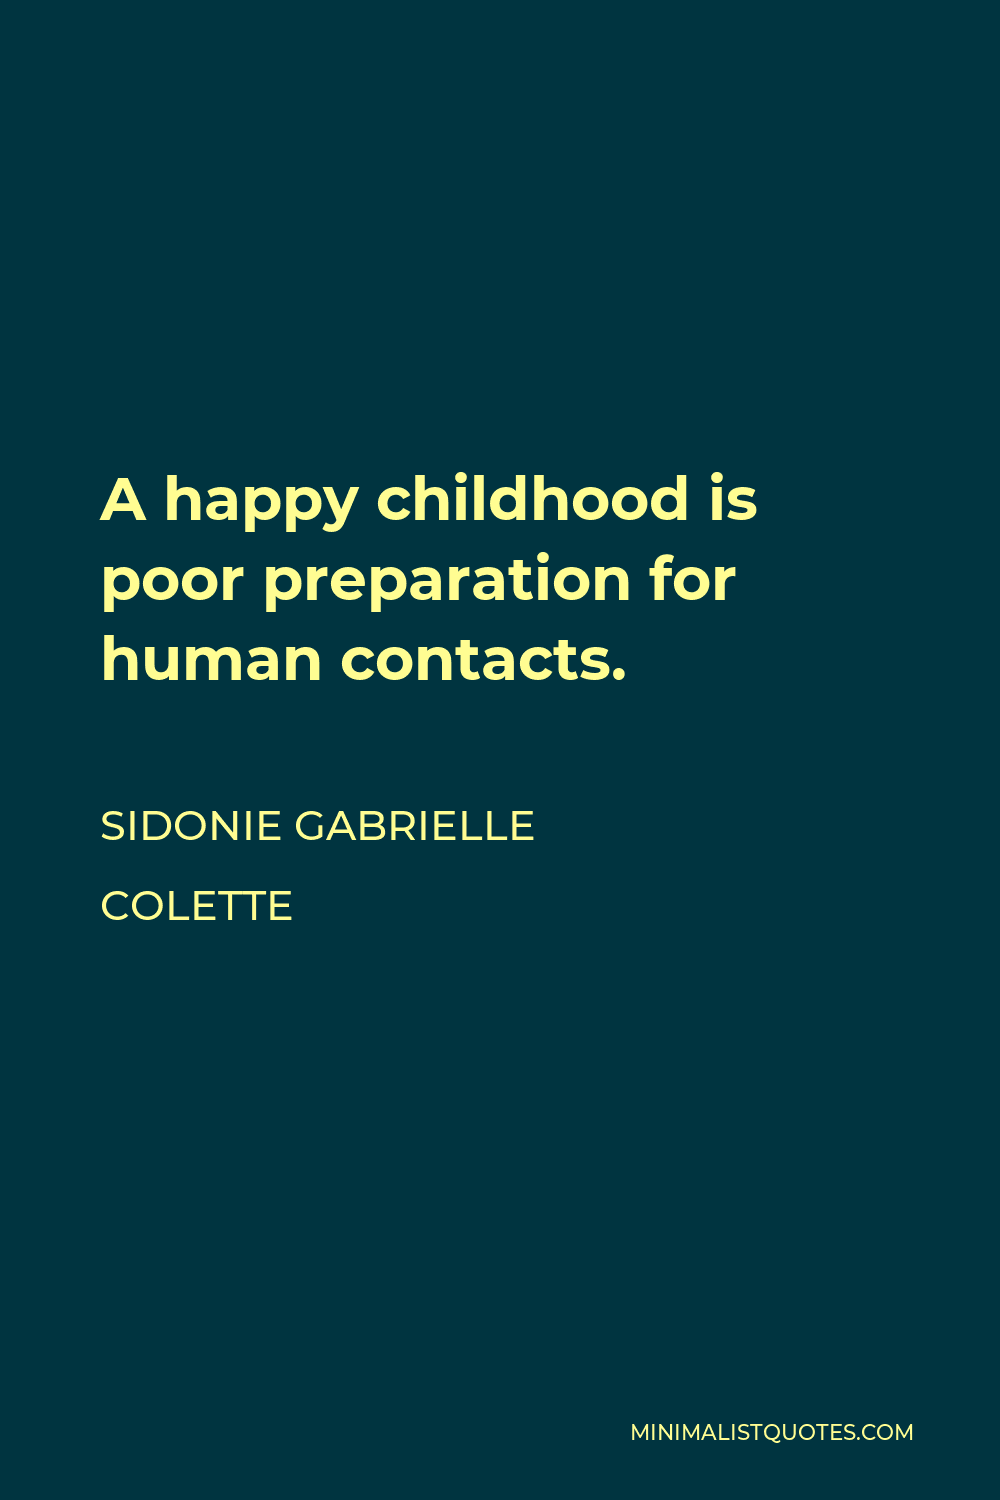 Sidonie Gabrielle Colette Quote - A happy childhood is poor preparation for human contacts.